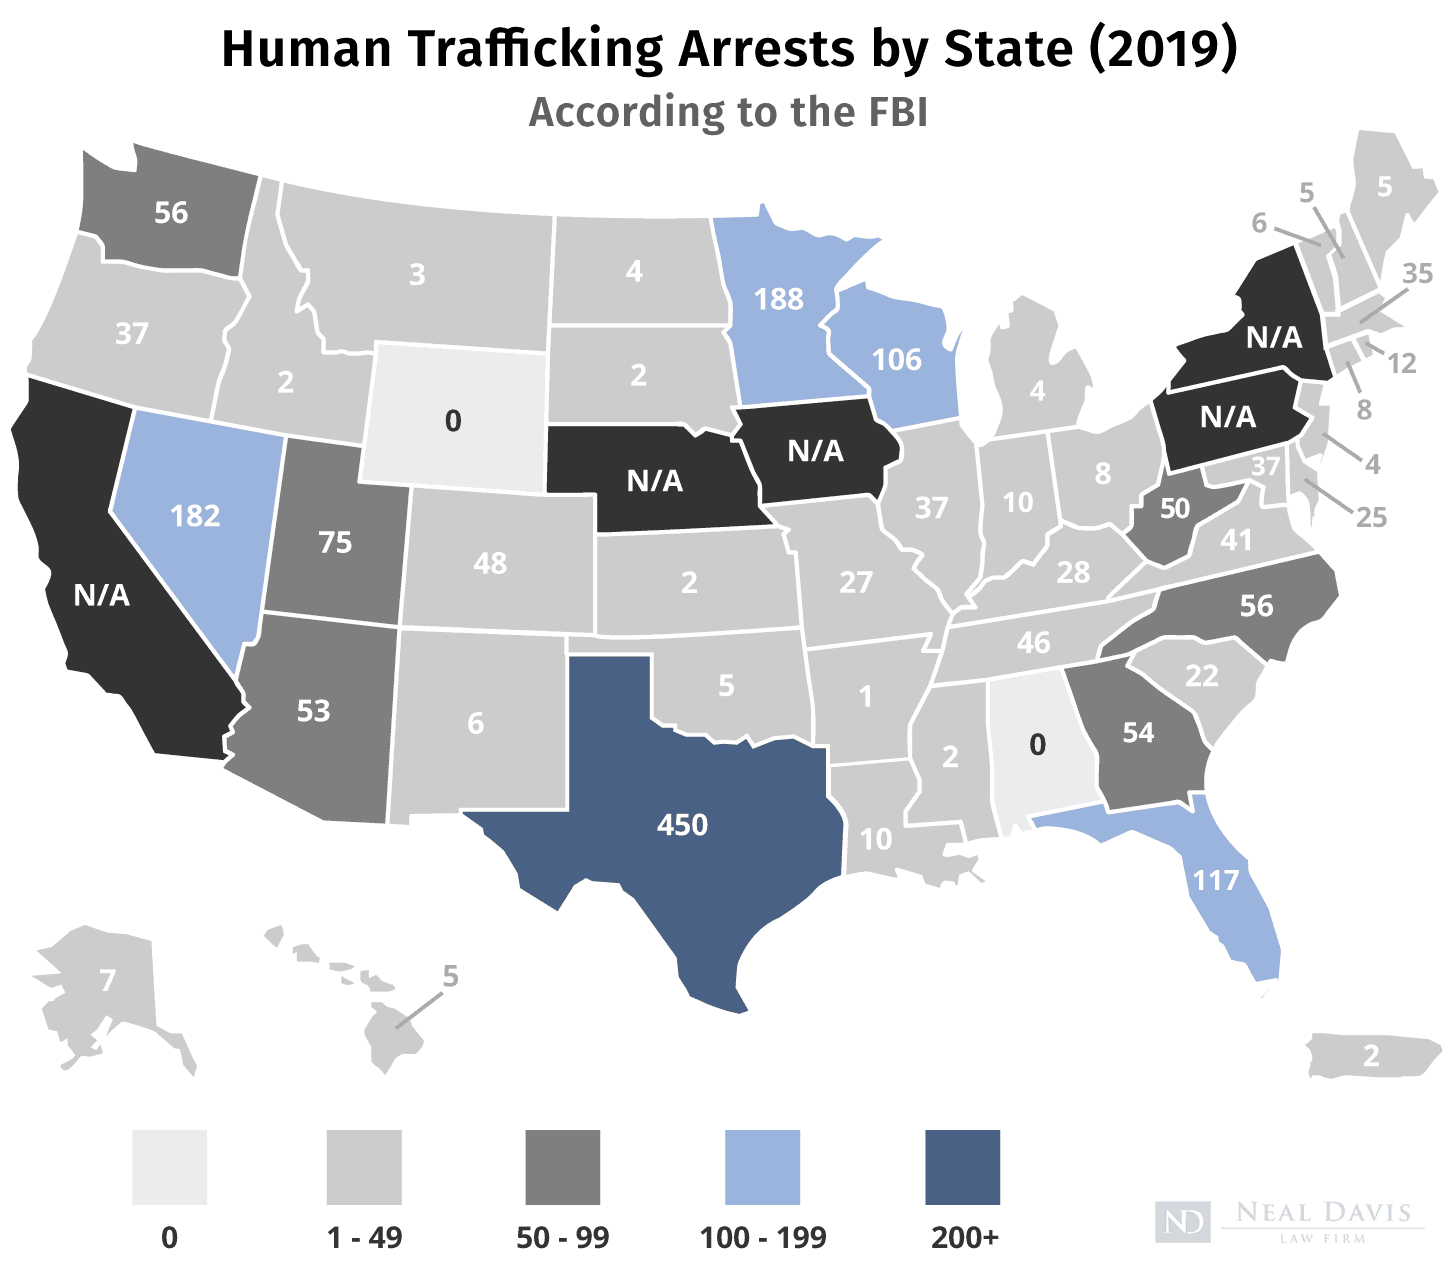 Human Trafficking Arrests by State (2019)